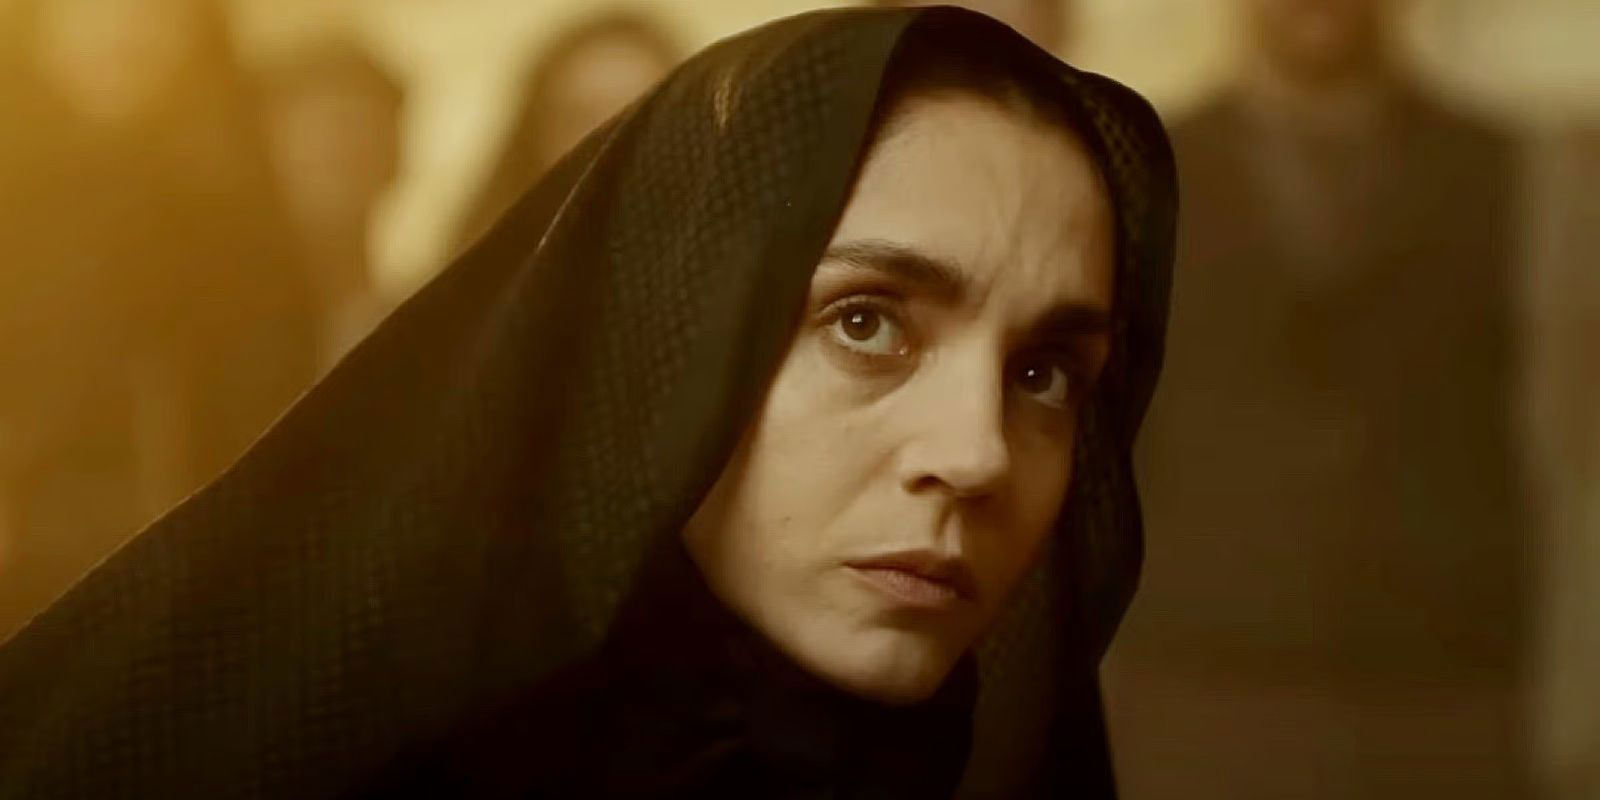 ‘Cabrini’ — Release Date, Trailer, Cast, and Everything We Know So Far